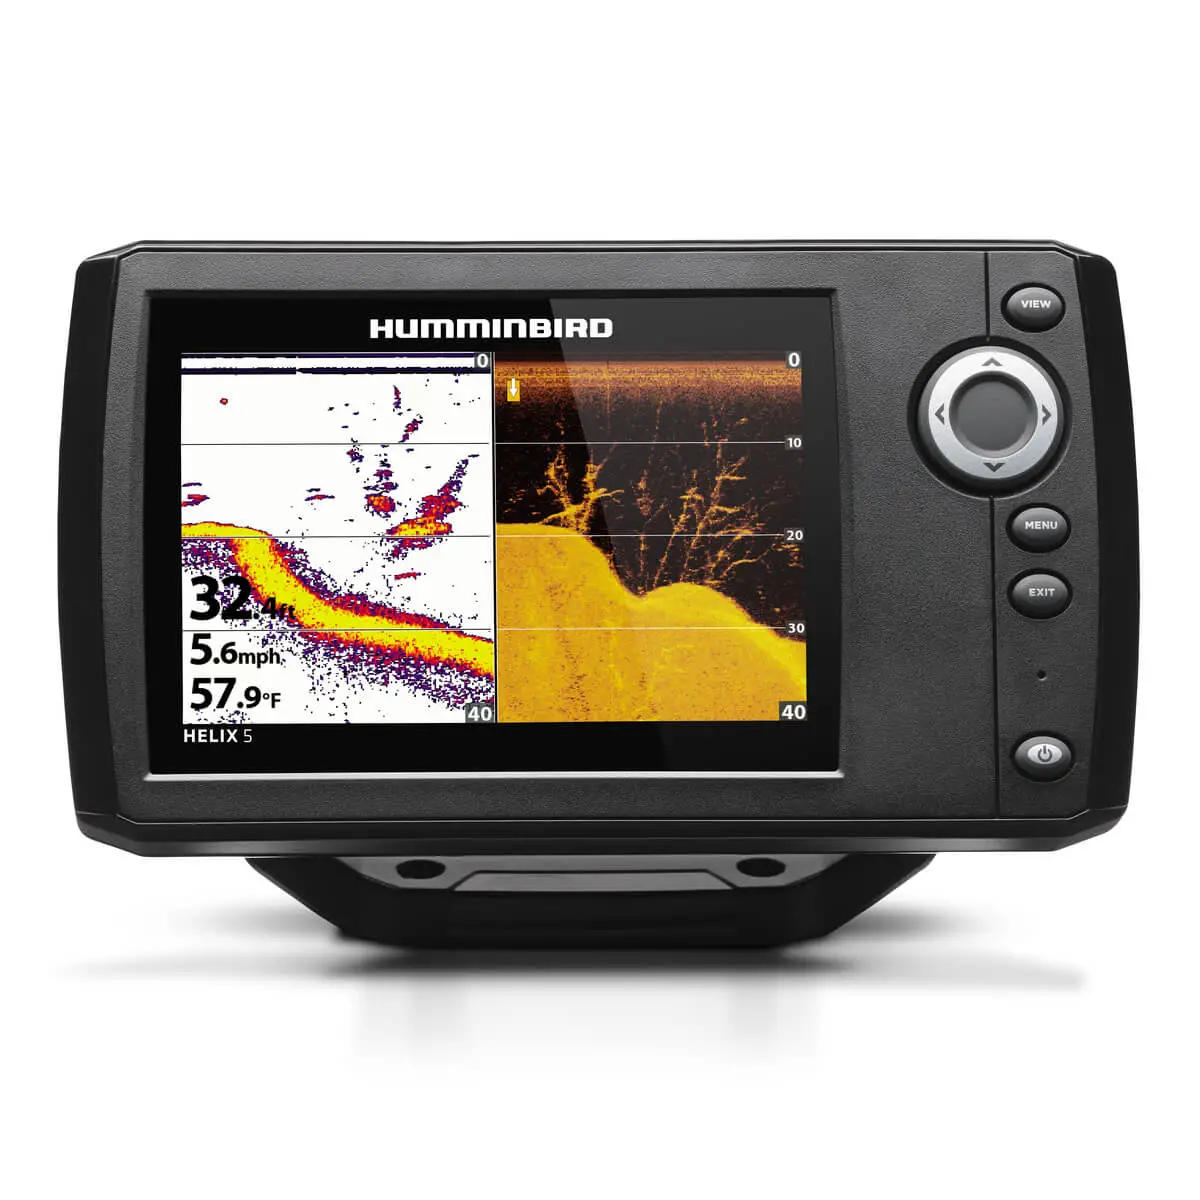 humminbird helix 5 fish finder turned on with display